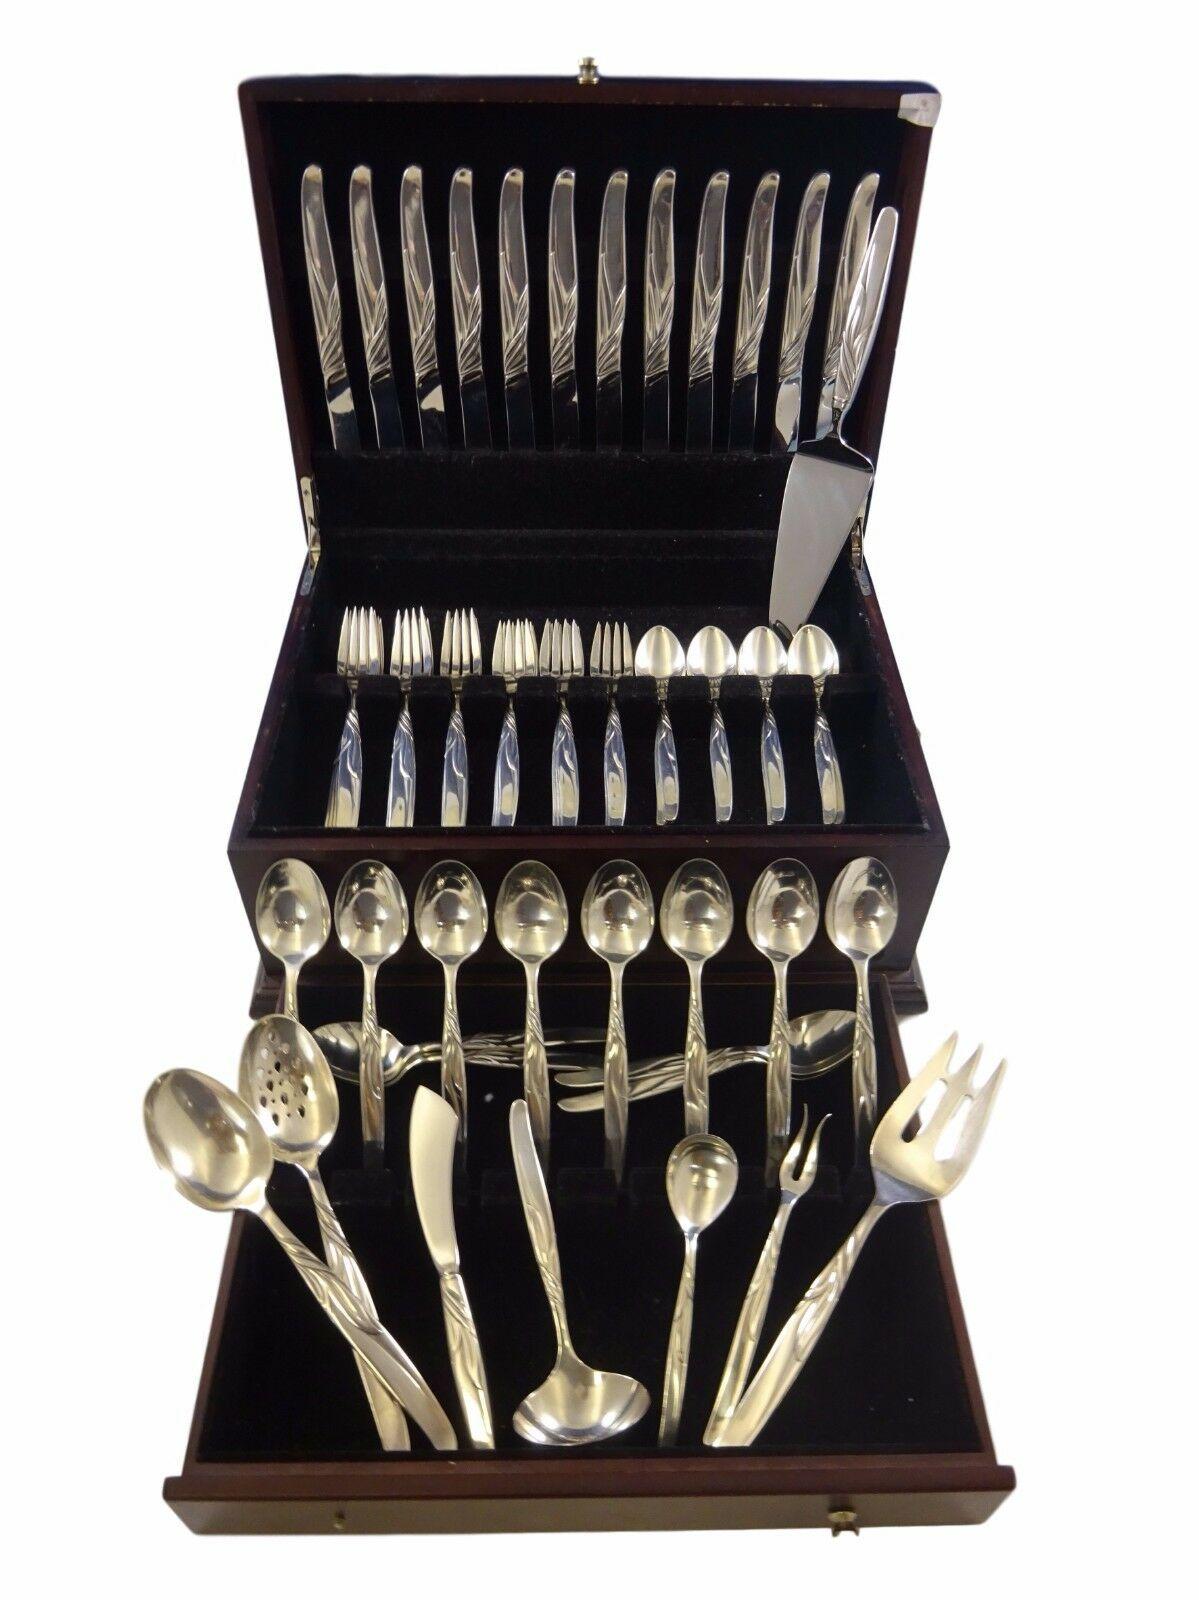 Beautiful Southwind by Towle Sterling silver flatware set - 68 pieces. This set includes:

12 knives, 8 3/4